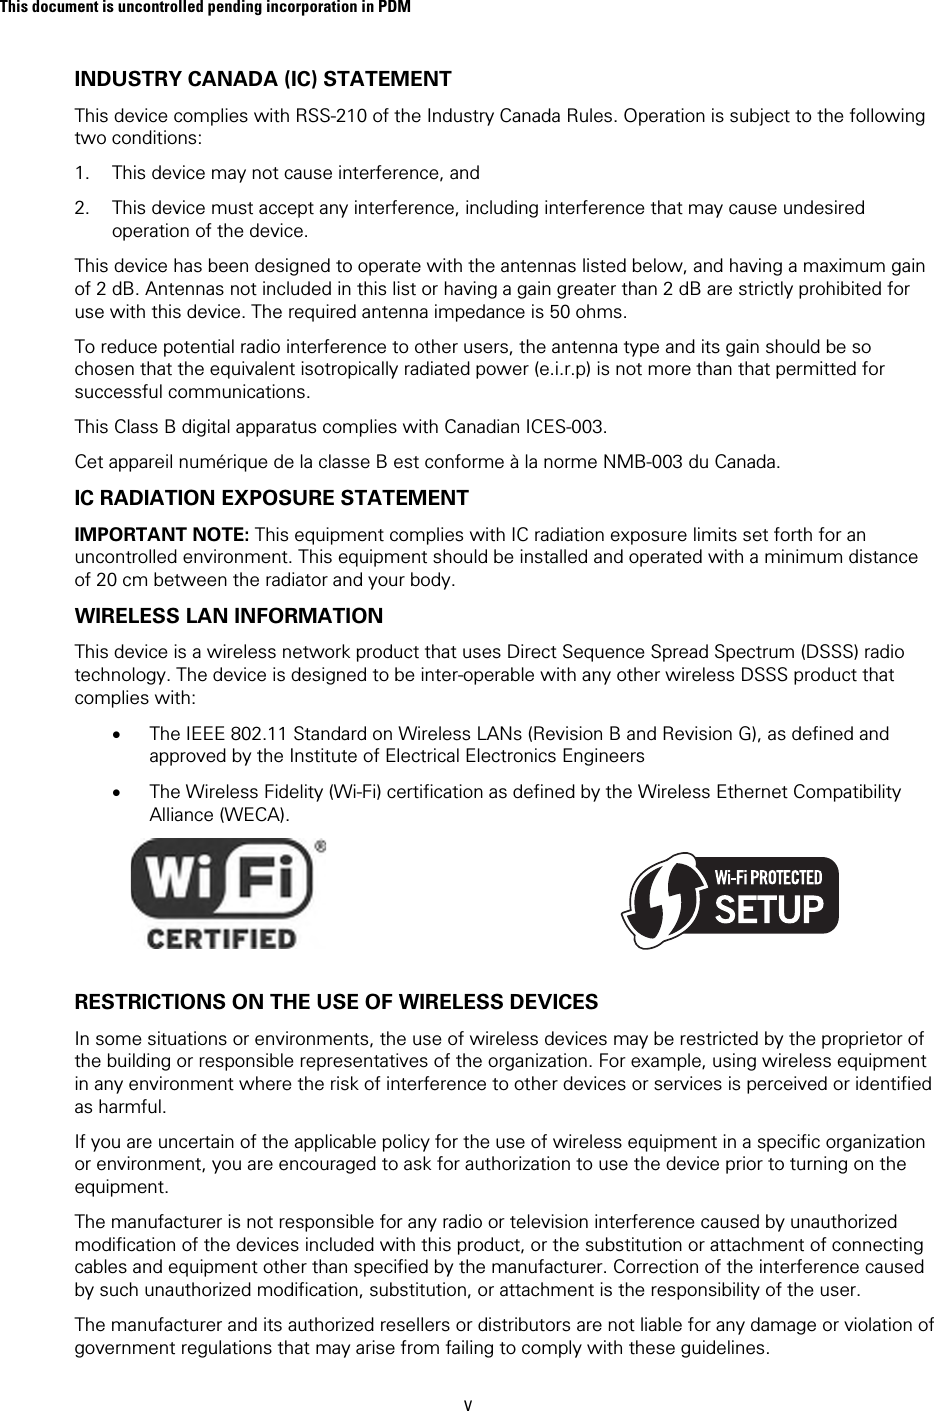 This document is uncontrolled pending incorporation in PDM  v INDUSTRY CANADA (IC) STATEMENT This device complies with RSS-210 of the Industry Canada Rules. Operation is subject to the following two conditions:  1. This device may not cause interference, and 2. This device must accept any interference, including interference that may cause undesired operation of the device. This device has been designed to operate with the antennas listed below, and having a maximum gain of 2 dB. Antennas not included in this list or having a gain greater than 2 dB are strictly prohibited for use with this device. The required antenna impedance is 50 ohms.  To reduce potential radio interference to other users, the antenna type and its gain should be so chosen that the equivalent isotropically radiated power (e.i.r.p) is not more than that permitted for successful communications. This Class B digital apparatus complies with Canadian ICES-003. Cet appareil numérique de la classe B est conforme à la norme NMB-003 du Canada. IC RADIATION EXPOSURE STATEMENT IMPORTANT NOTE: This equipment complies with IC radiation exposure limits set forth for an uncontrolled environment. This equipment should be installed and operated with a minimum distance of 20 cm between the radiator and your body.  WIRELESS LAN INFORMATION This device is a wireless network product that uses Direct Sequence Spread Spectrum (DSSS) radio technology. The device is designed to be inter-operable with any other wireless DSSS product that complies with: • The IEEE 802.11 Standard on Wireless LANs (Revision B and Revision G), as defined and approved by the Institute of Electrical Electronics Engineers • The Wireless Fidelity (Wi-Fi) certification as defined by the Wireless Ethernet Compatibility Alliance (WECA).                                                  RESTRICTIONS ON THE USE OF WIRELESS DEVICES  In some situations or environments, the use of wireless devices may be restricted by the proprietor of the building or responsible representatives of the organization. For example, using wireless equipment in any environment where the risk of interference to other devices or services is perceived or identified as harmful.  If you are uncertain of the applicable policy for the use of wireless equipment in a specific organization or environment, you are encouraged to ask for authorization to use the device prior to turning on the equipment.  The manufacturer is not responsible for any radio or television interference caused by unauthorized modification of the devices included with this product, or the substitution or attachment of connecting cables and equipment other than specified by the manufacturer. Correction of the interference caused by such unauthorized modification, substitution, or attachment is the responsibility of the user.  The manufacturer and its authorized resellers or distributors are not liable for any damage or violation of government regulations that may arise from failing to comply with these guidelines. 